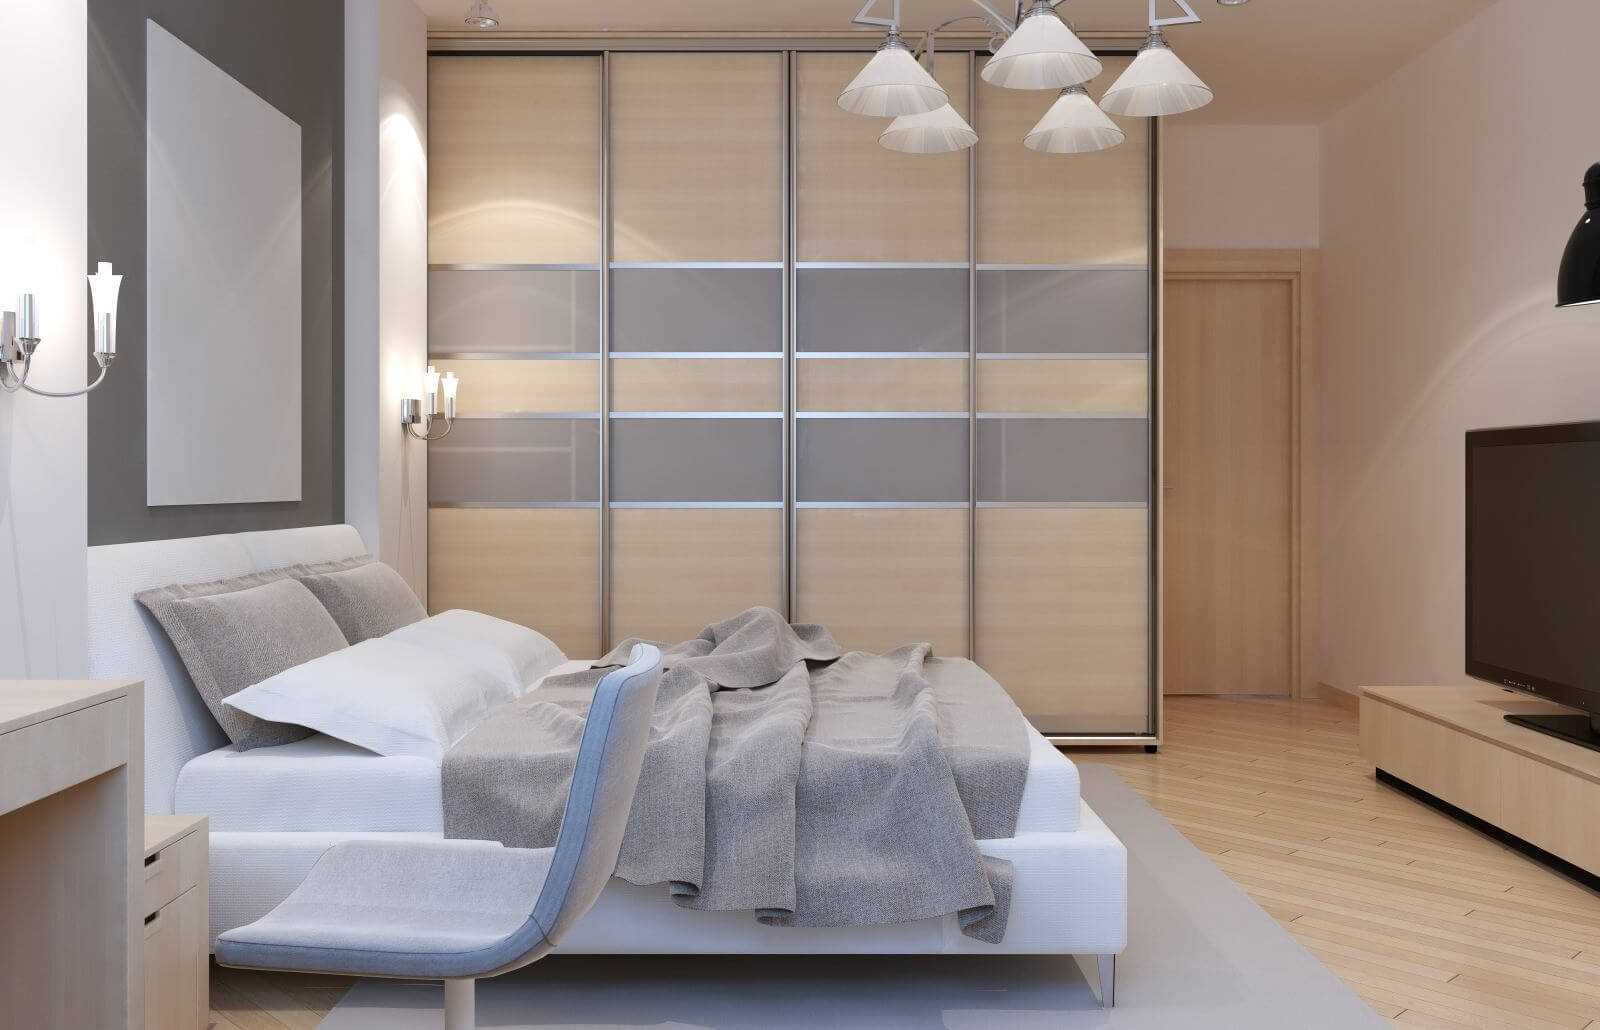 Master bedroom art deco style. Large closet with sliding doors, white walls and light laminate. 3D render